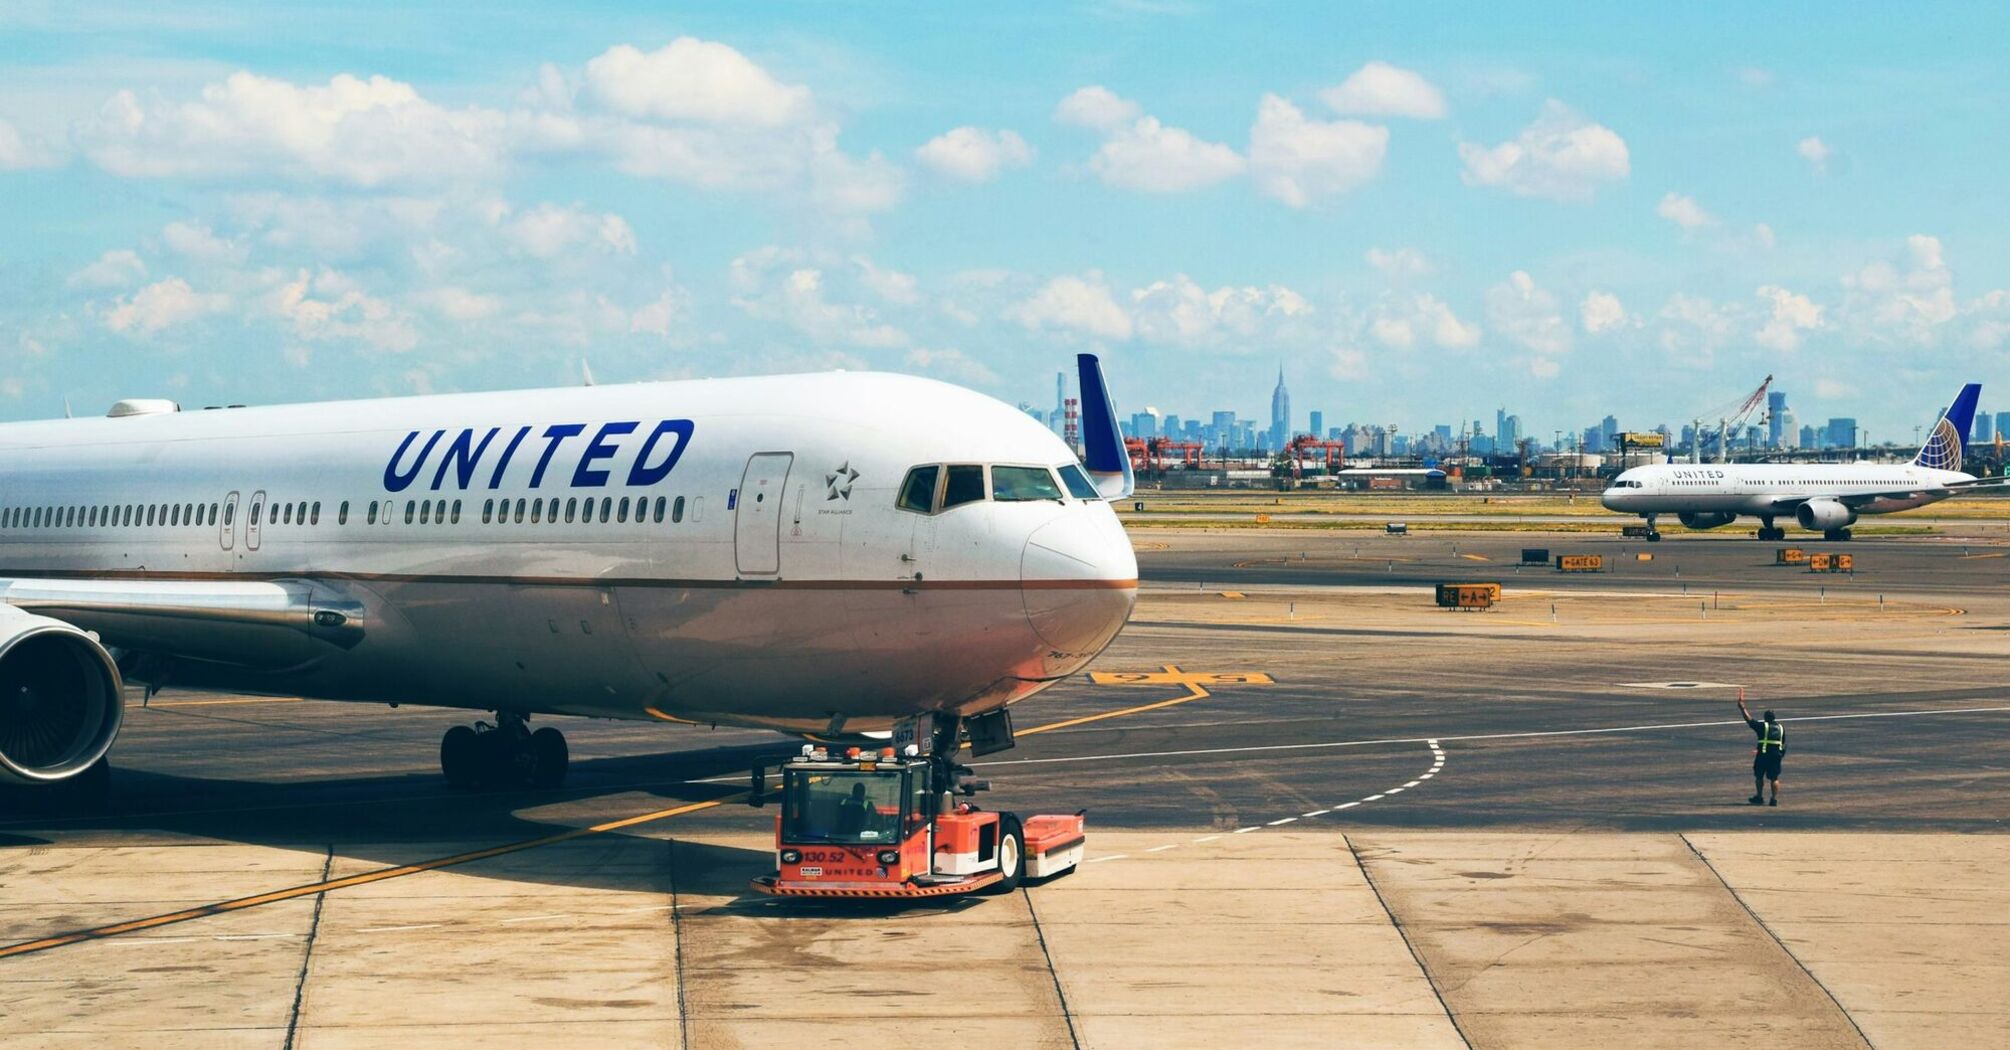 United Airlines plane on the tarmac at an airport